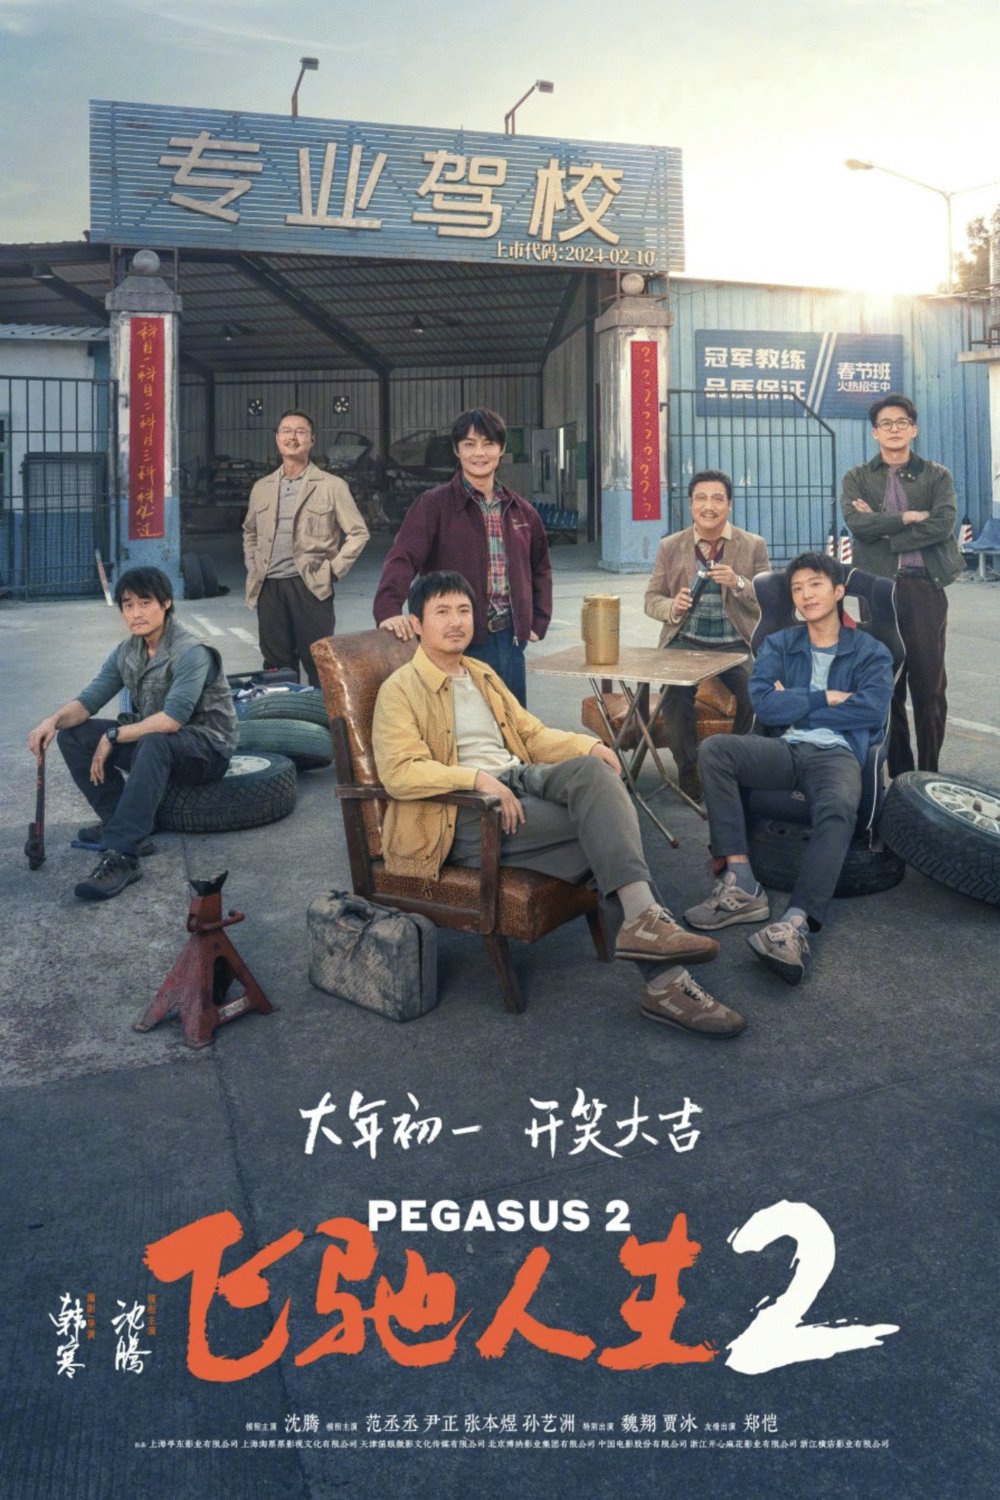 Chinese poster of the movie Pegasus 2